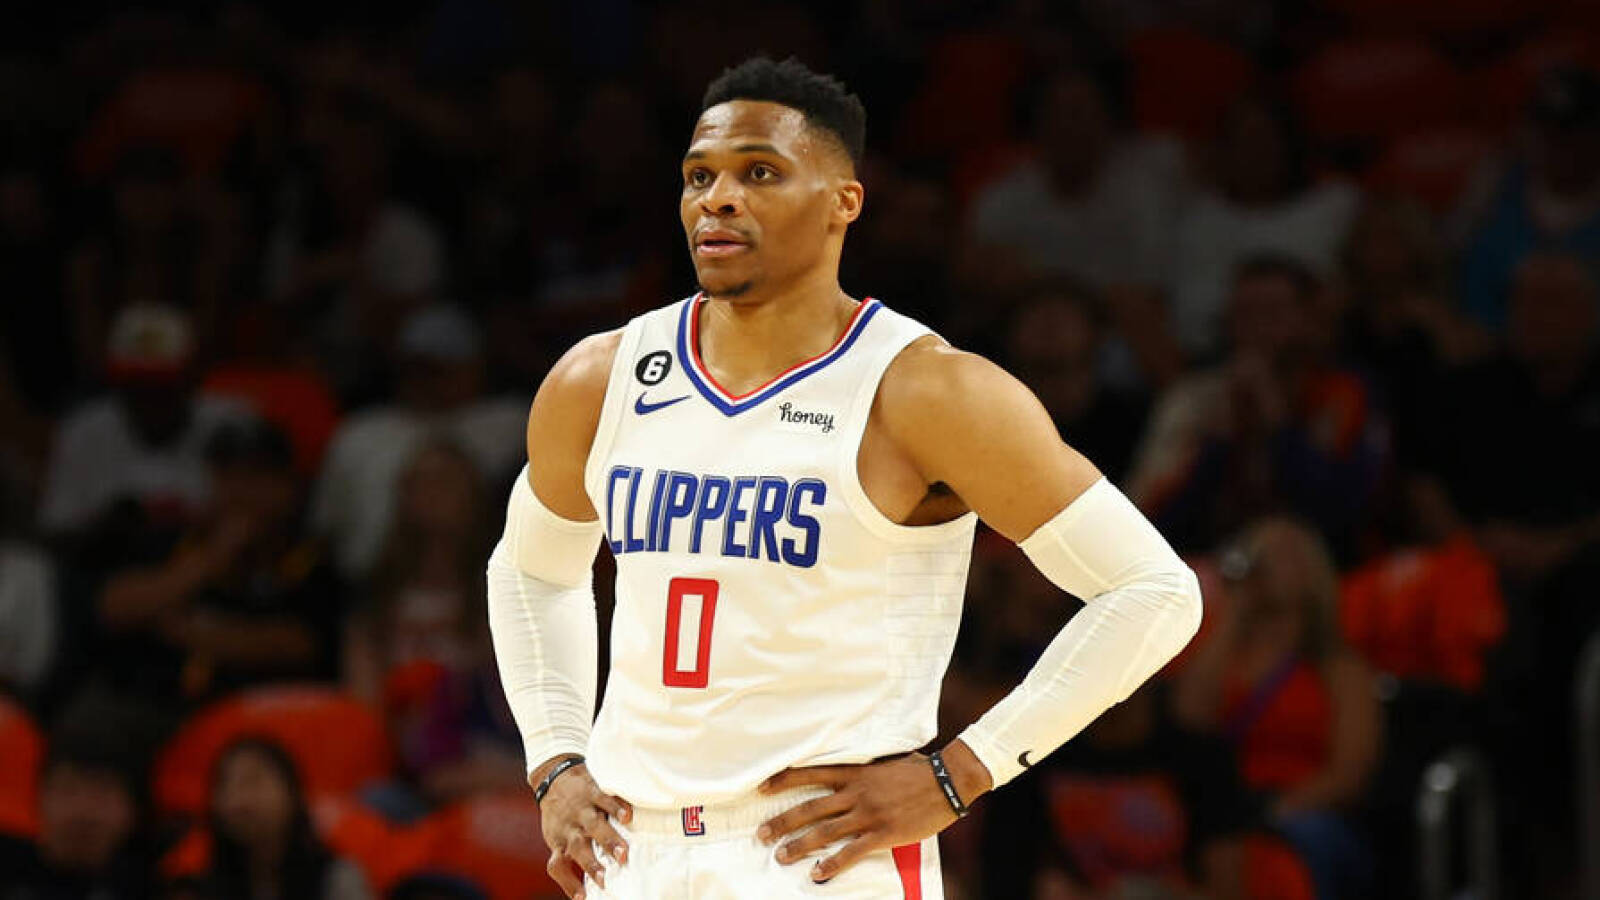 Three-time All-Star believes Russell Westbrook should've earned a $100M-$150M contract this offseason